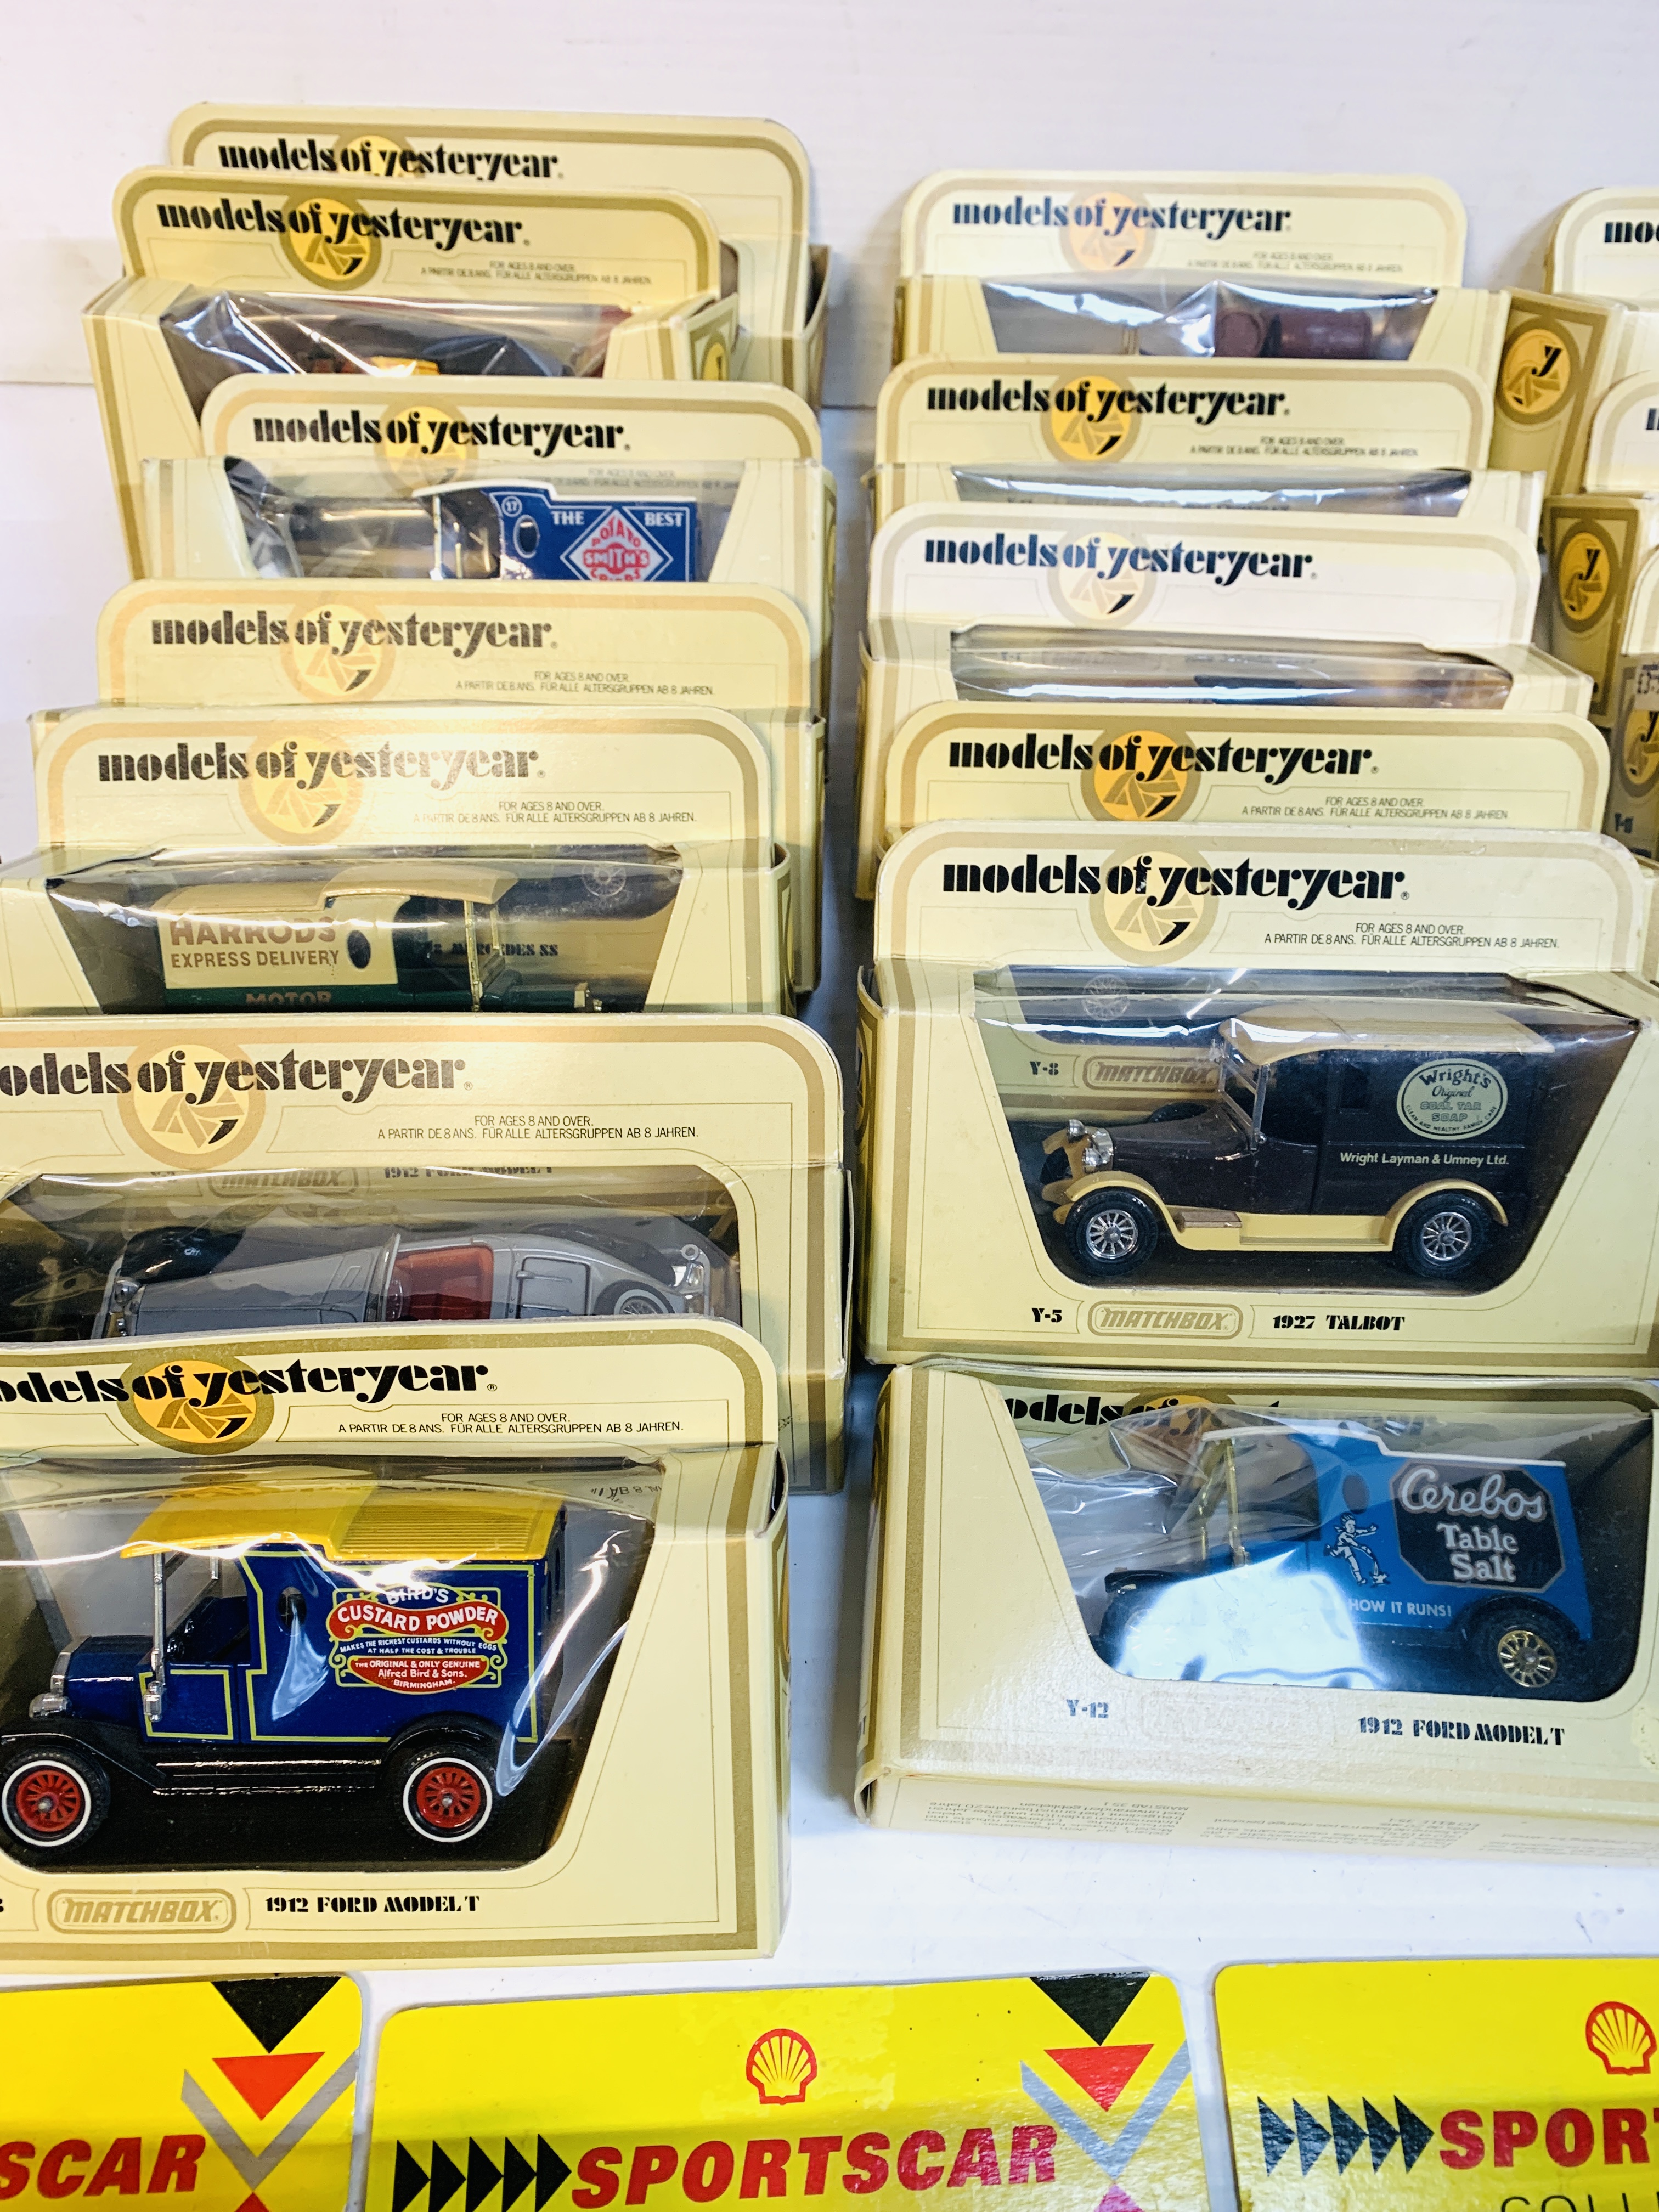 Nineteen boxed Matchbox Models of Yesteryear, including delivery vans and cars - Image 2 of 4